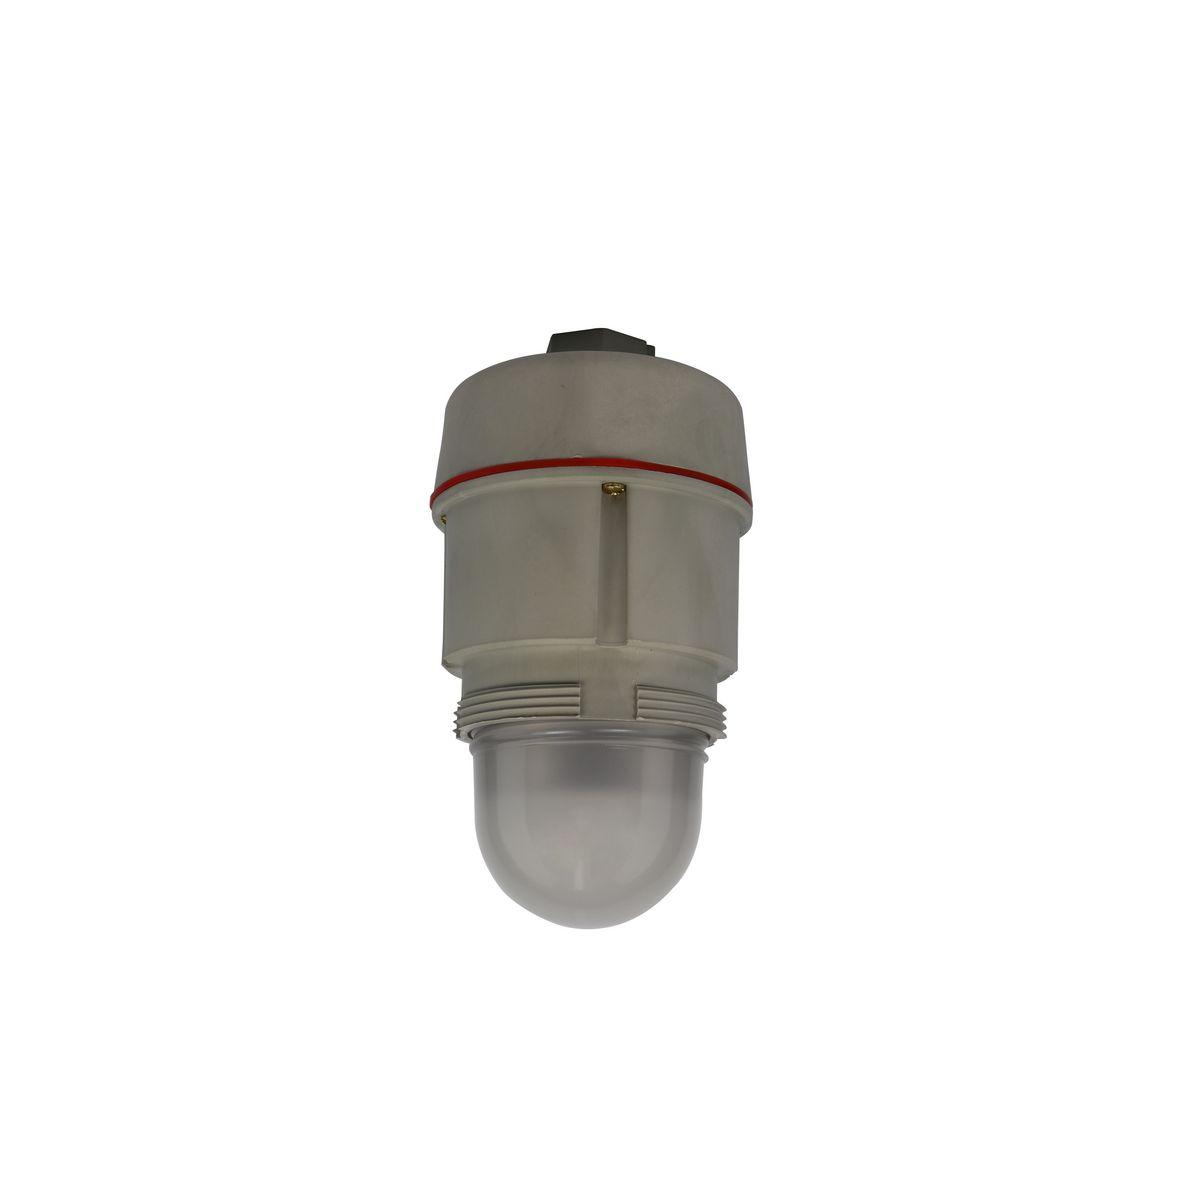 Hubbell NVL230A2N NVL Series Non-Metallic Corrosion Resistant Hazardous Location LED Fixture, 3/4" Pendant Mount  ; Energy and labor-saving LED ; High Efﬁcacy (lumens per watt) ; Compact Size ; Type 3, 4, & 4X Rated ; IP66 Marine Rated ; ABS Approved ; Resists corrosive ef